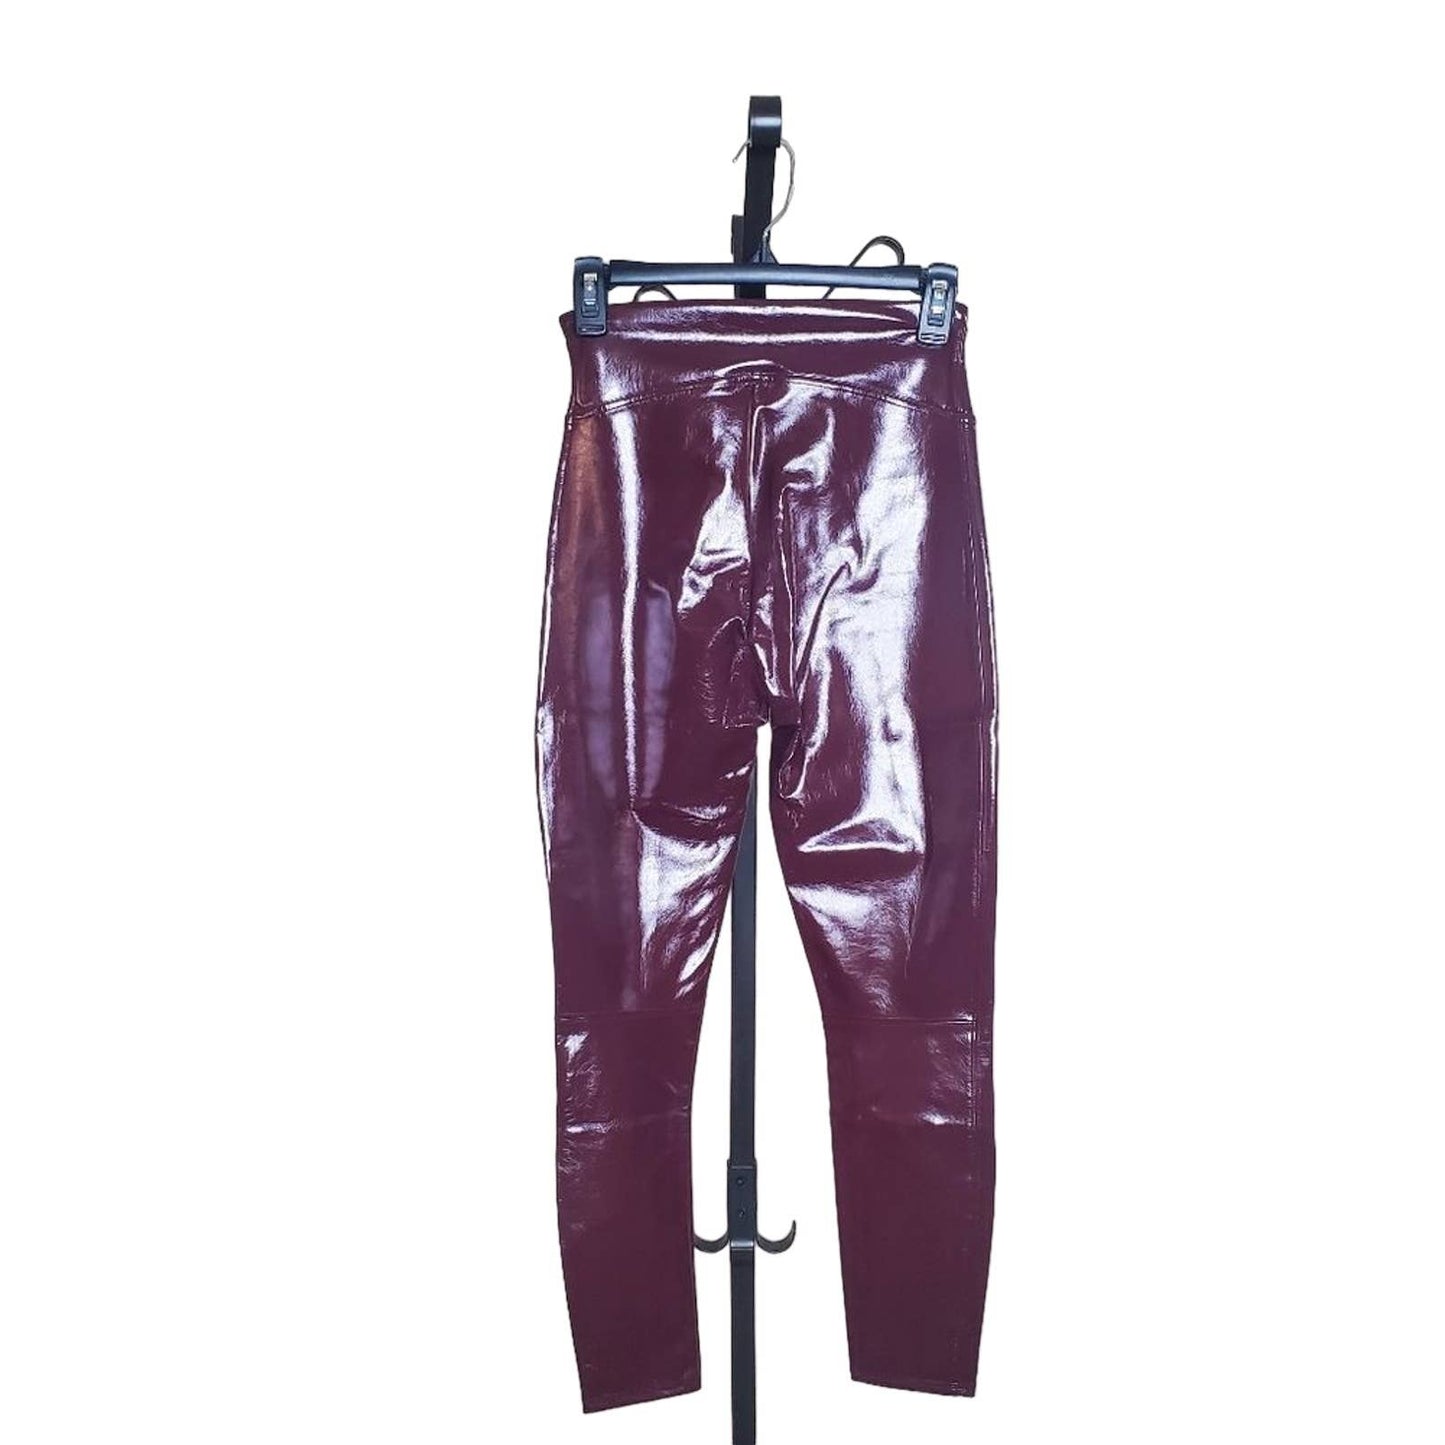 NEW WITH TAGS Spanx Faux Patent Leather Leggings, Ruby, Petite Small